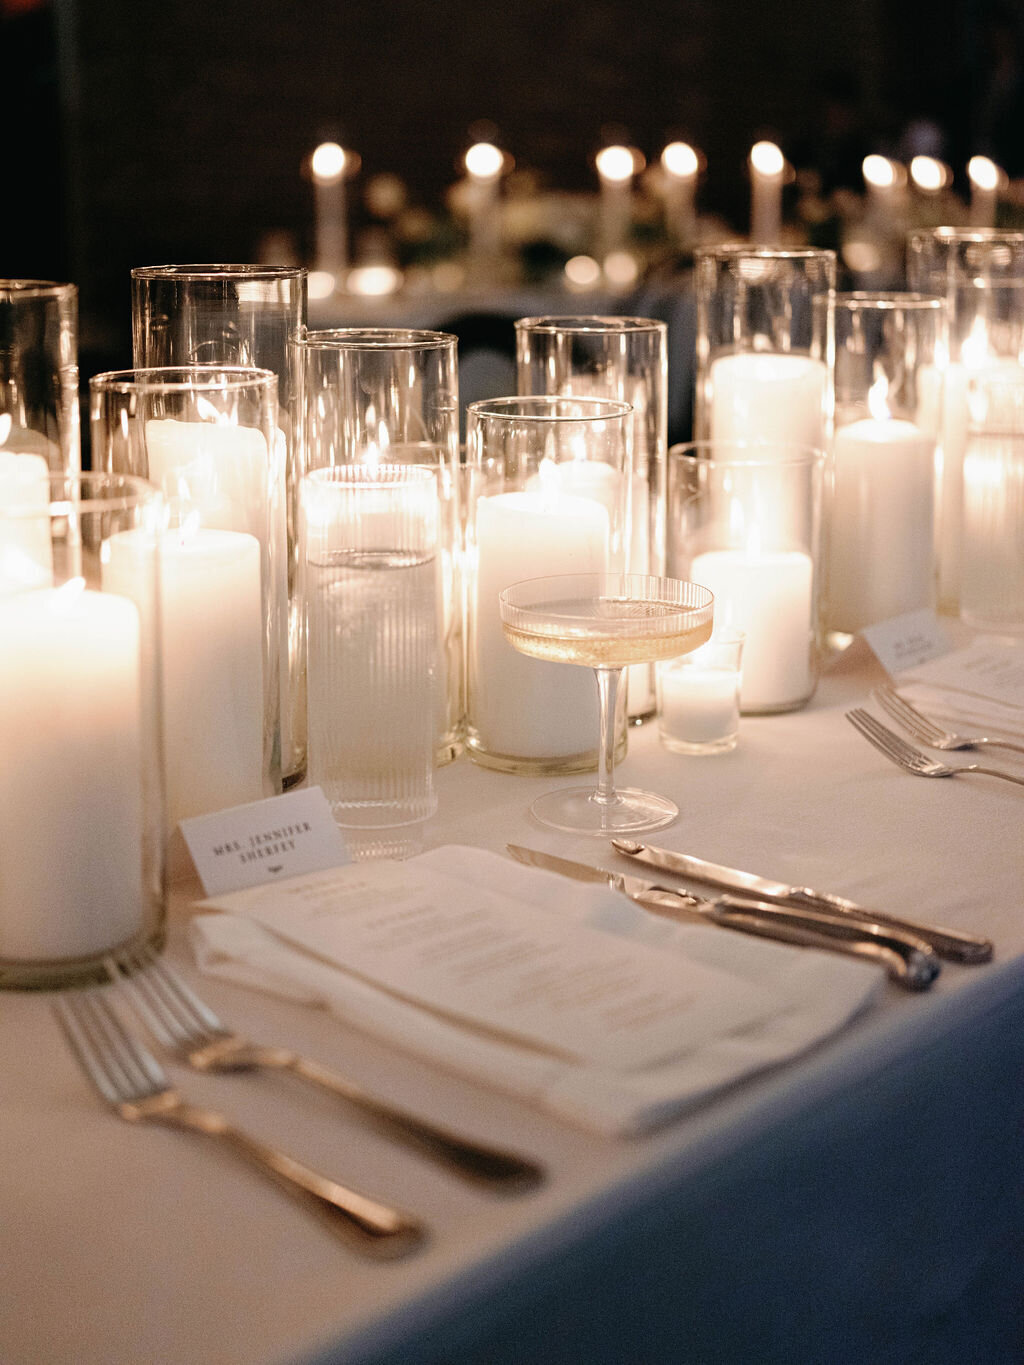 Candlelit reception table with ivory pillar candle centerpiece and ribbed glassware.